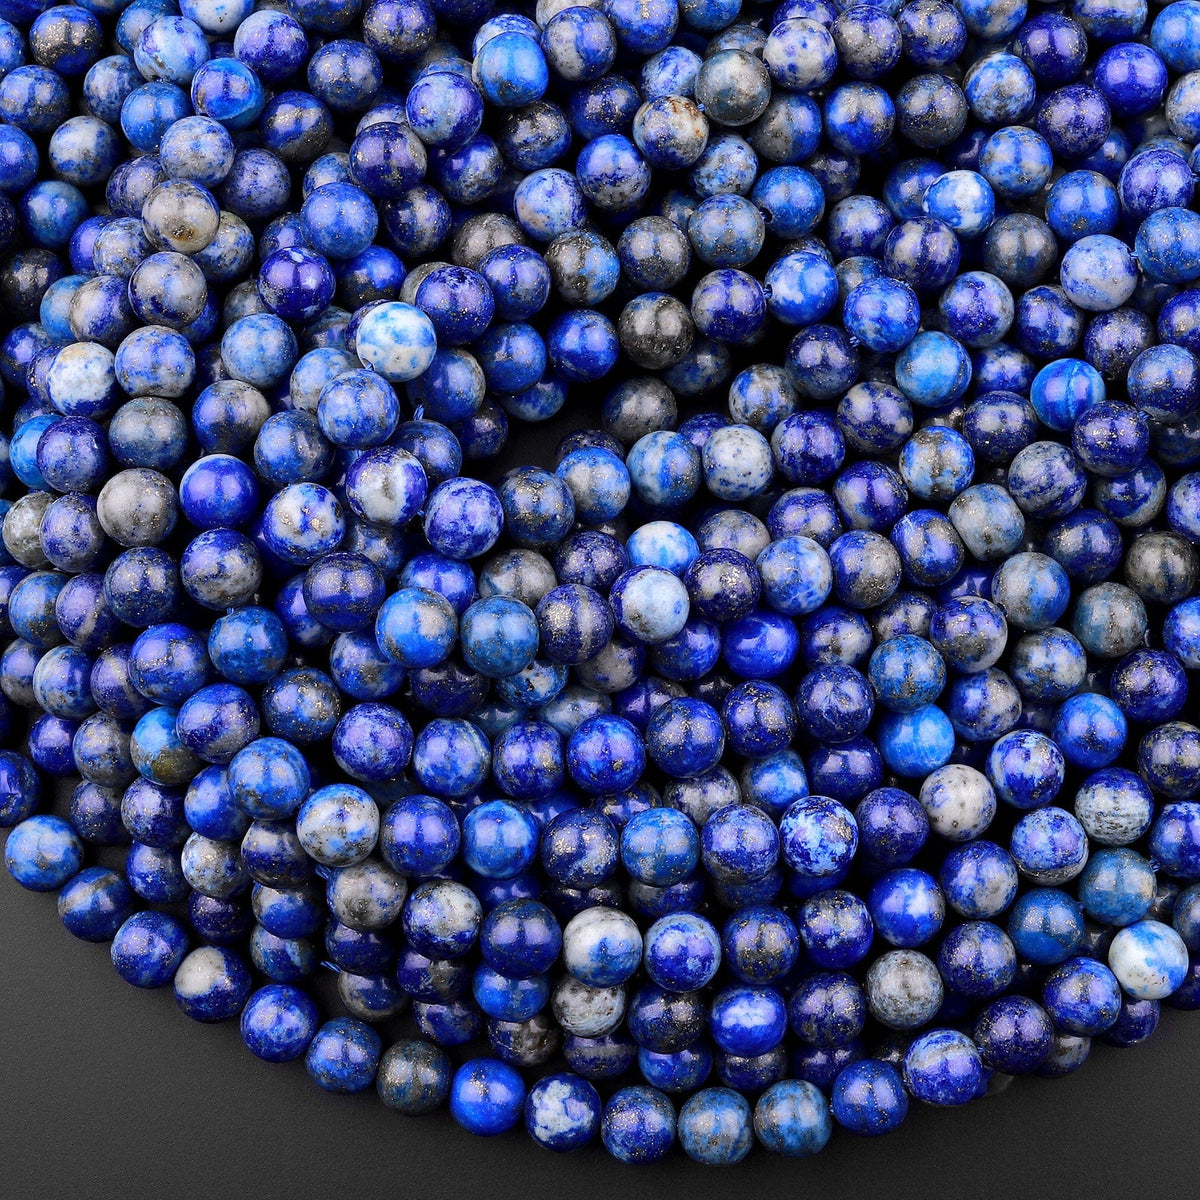 Natural100% Blue Lapis Lazuli Stone Beads Loose Rondelle Small Beads For  Jewelry Making Diy Needlework Bracelet Necklace 2/3/4mm - AliExpress